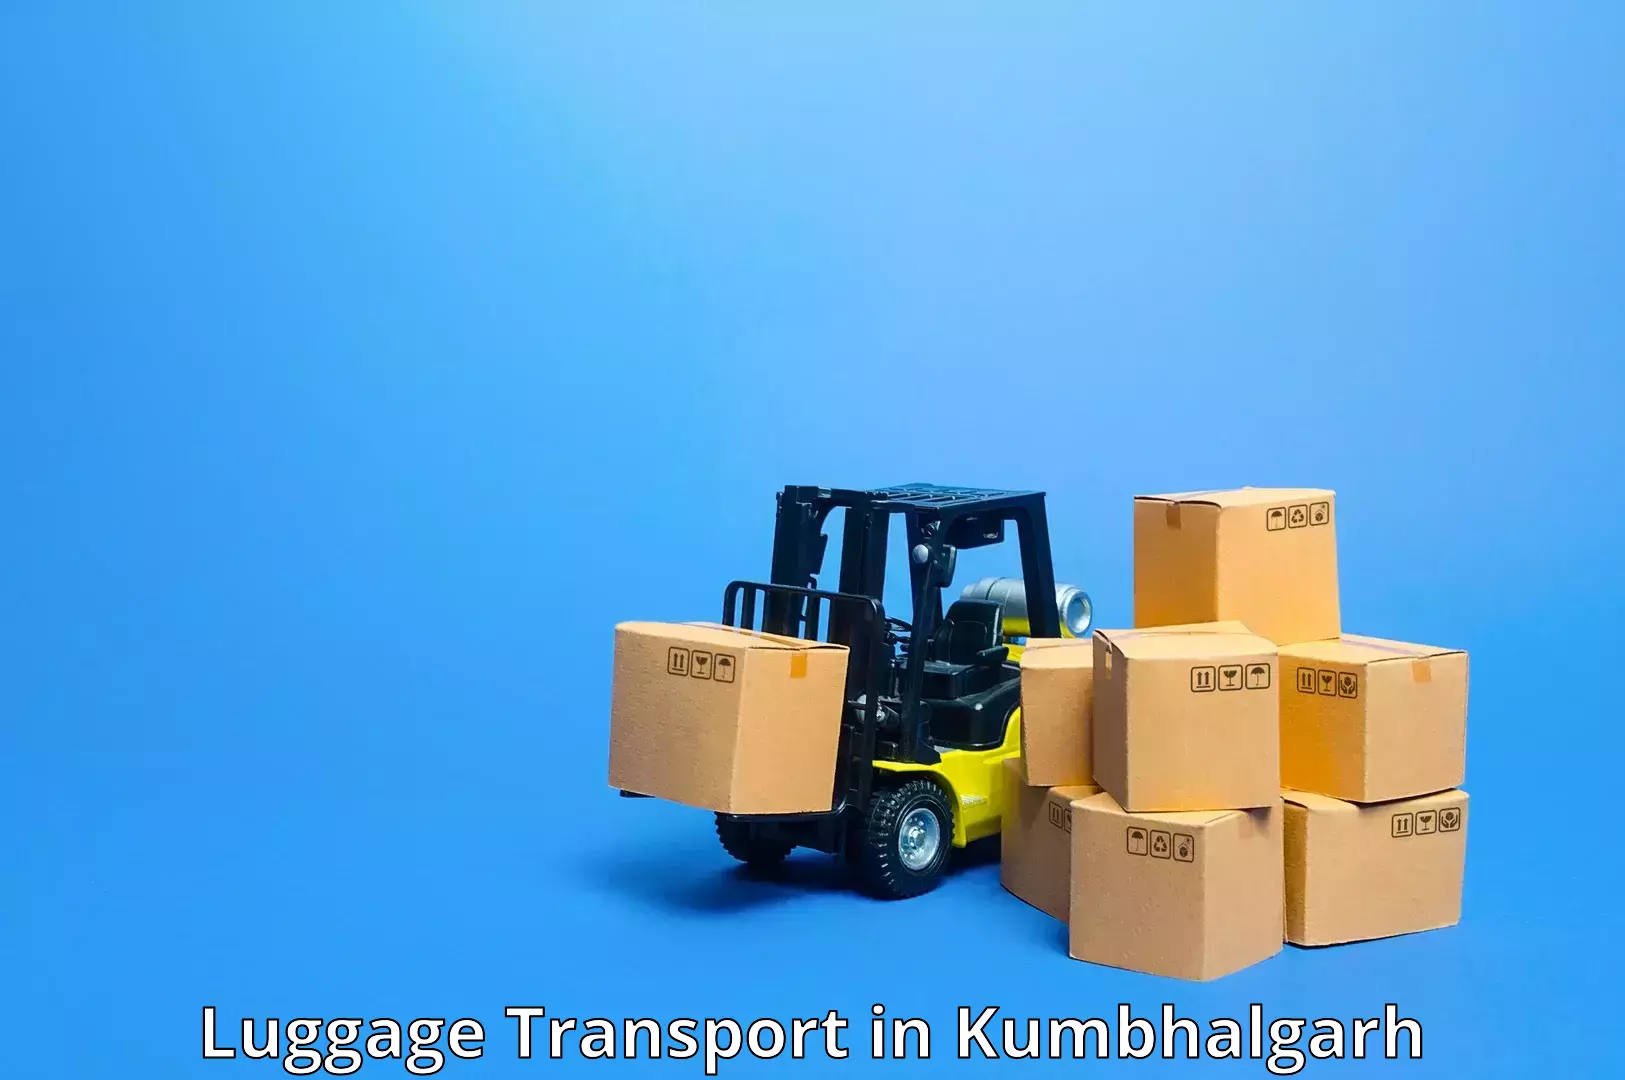 Luggage delivery operations in Kumbhalgarh